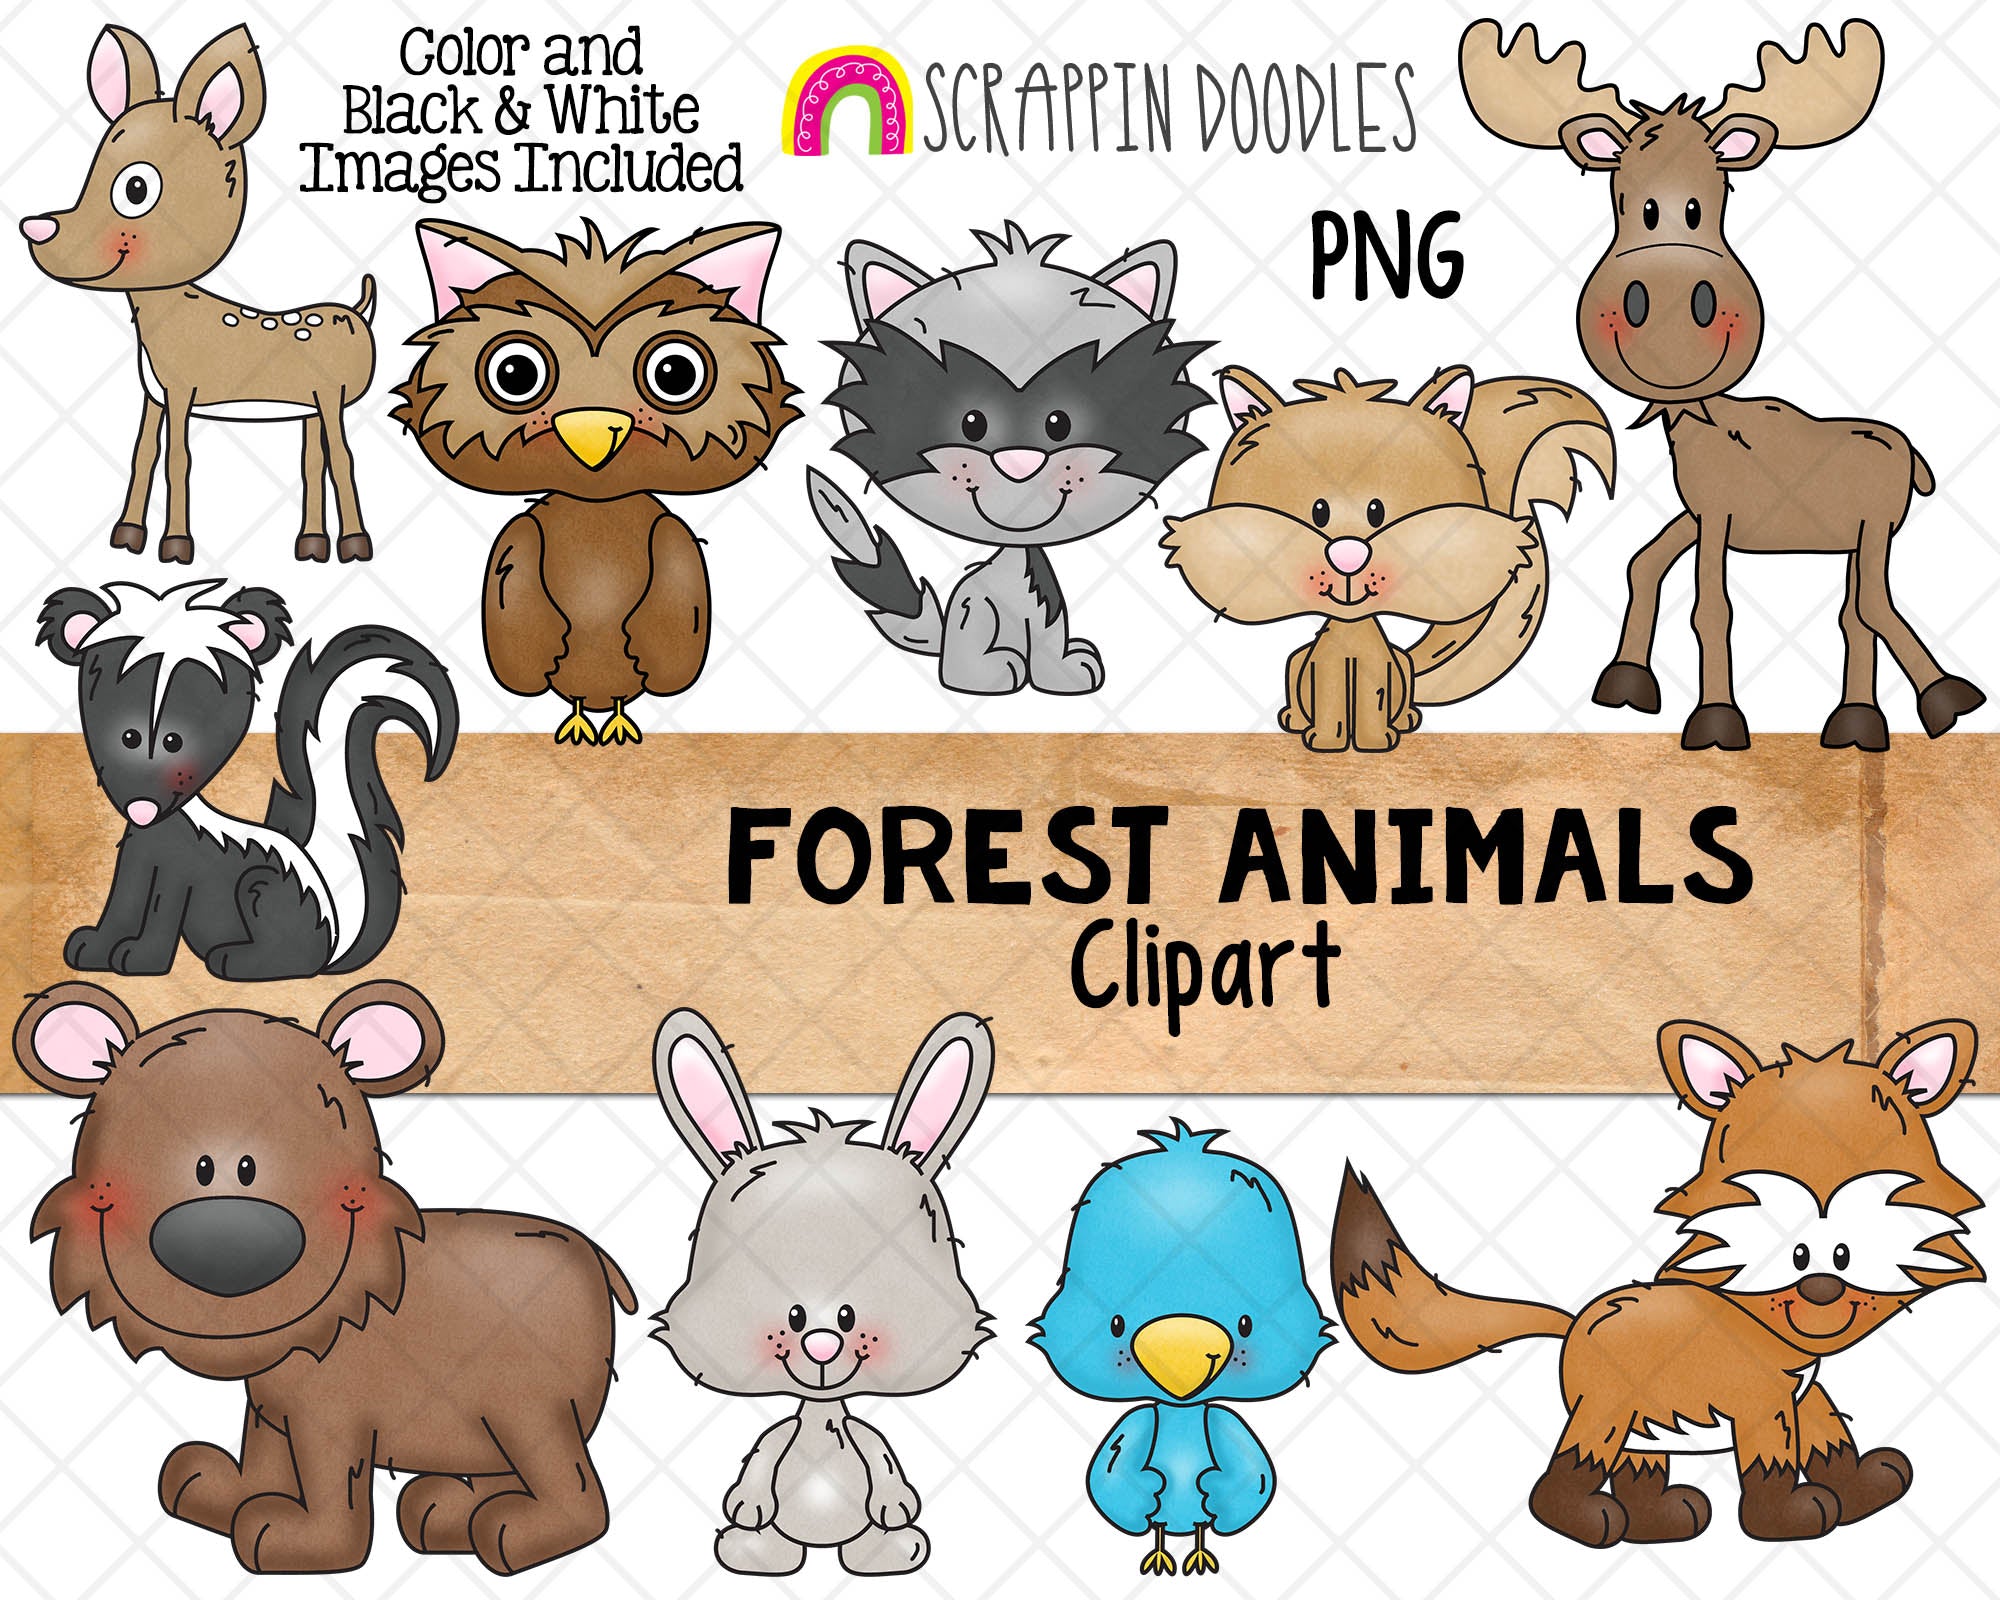 Forest Animals ClipArt - Woodland Brown Bear - Moose - Raccoon - Fox P –  Scrappin Doodles